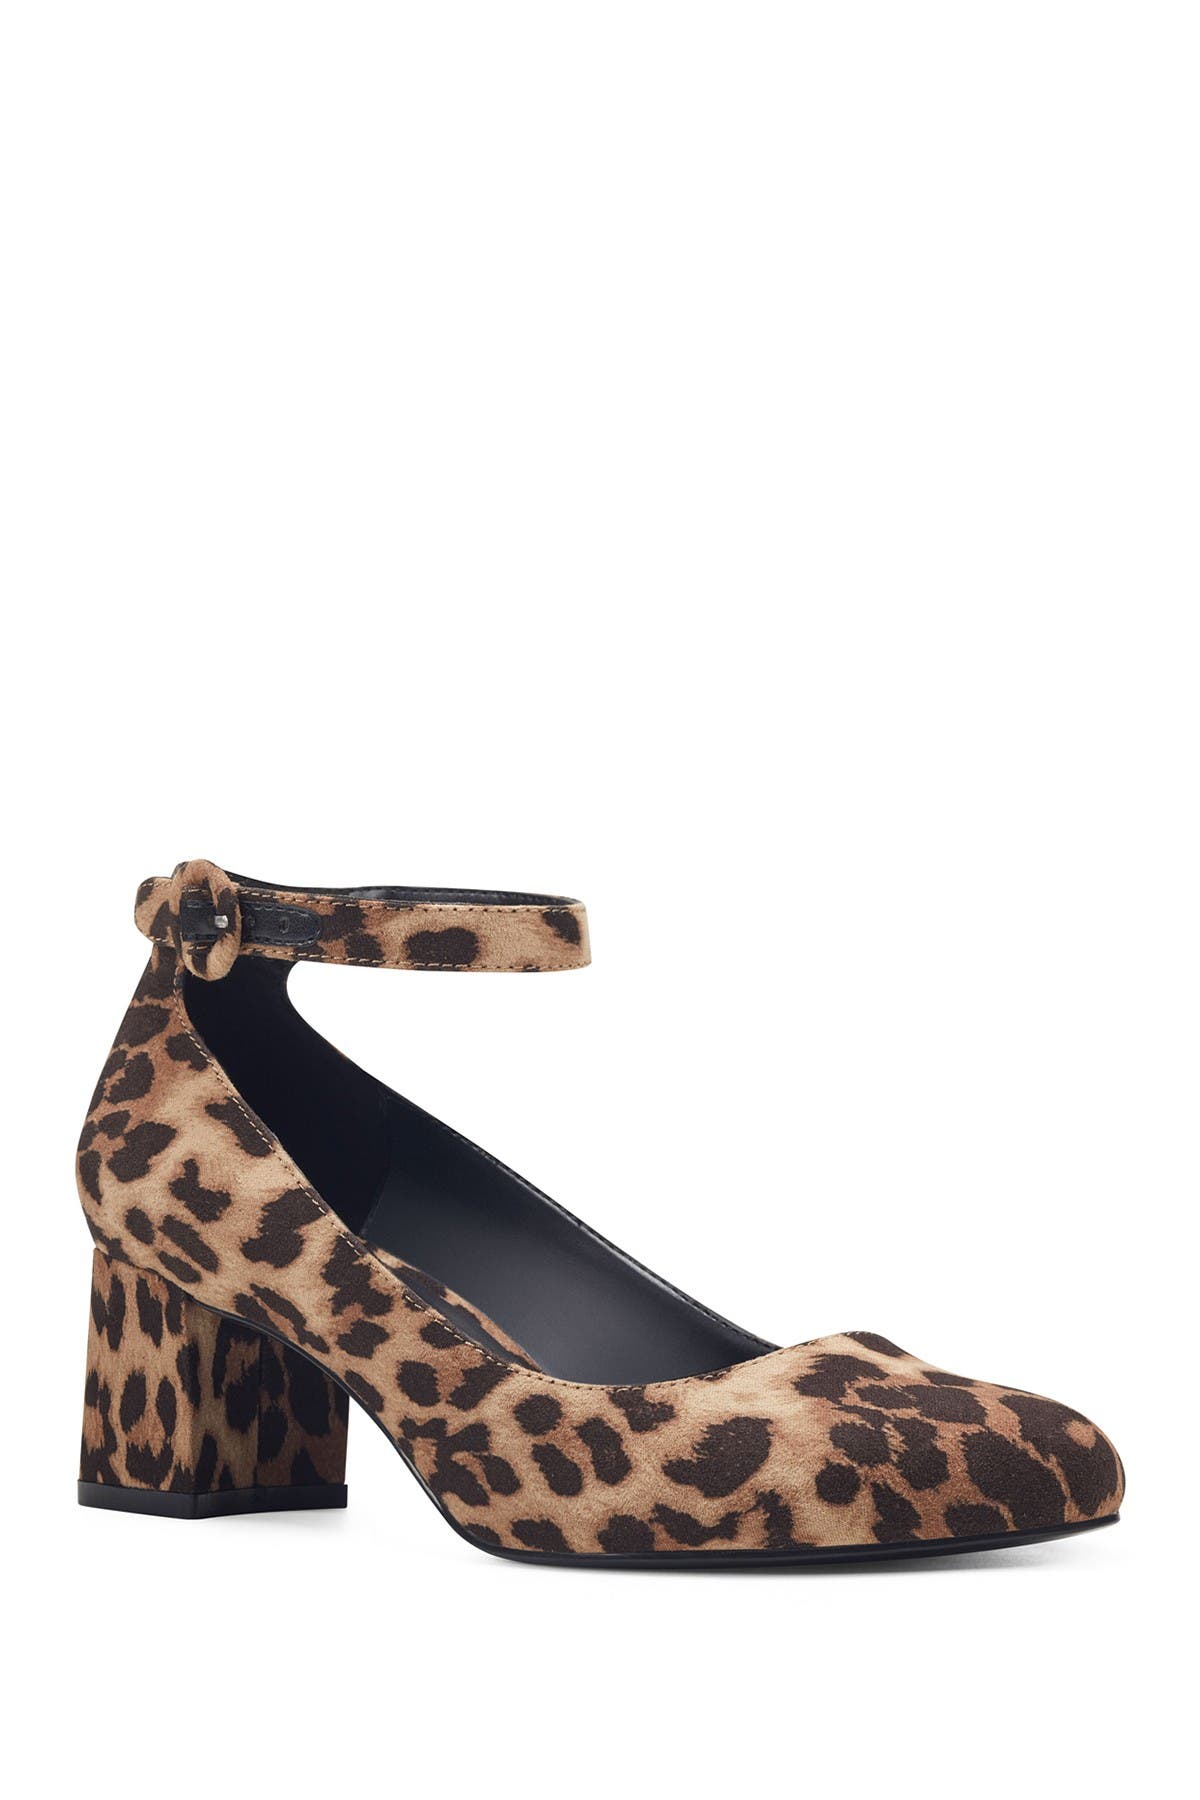 leopard print pumps with ankle strap